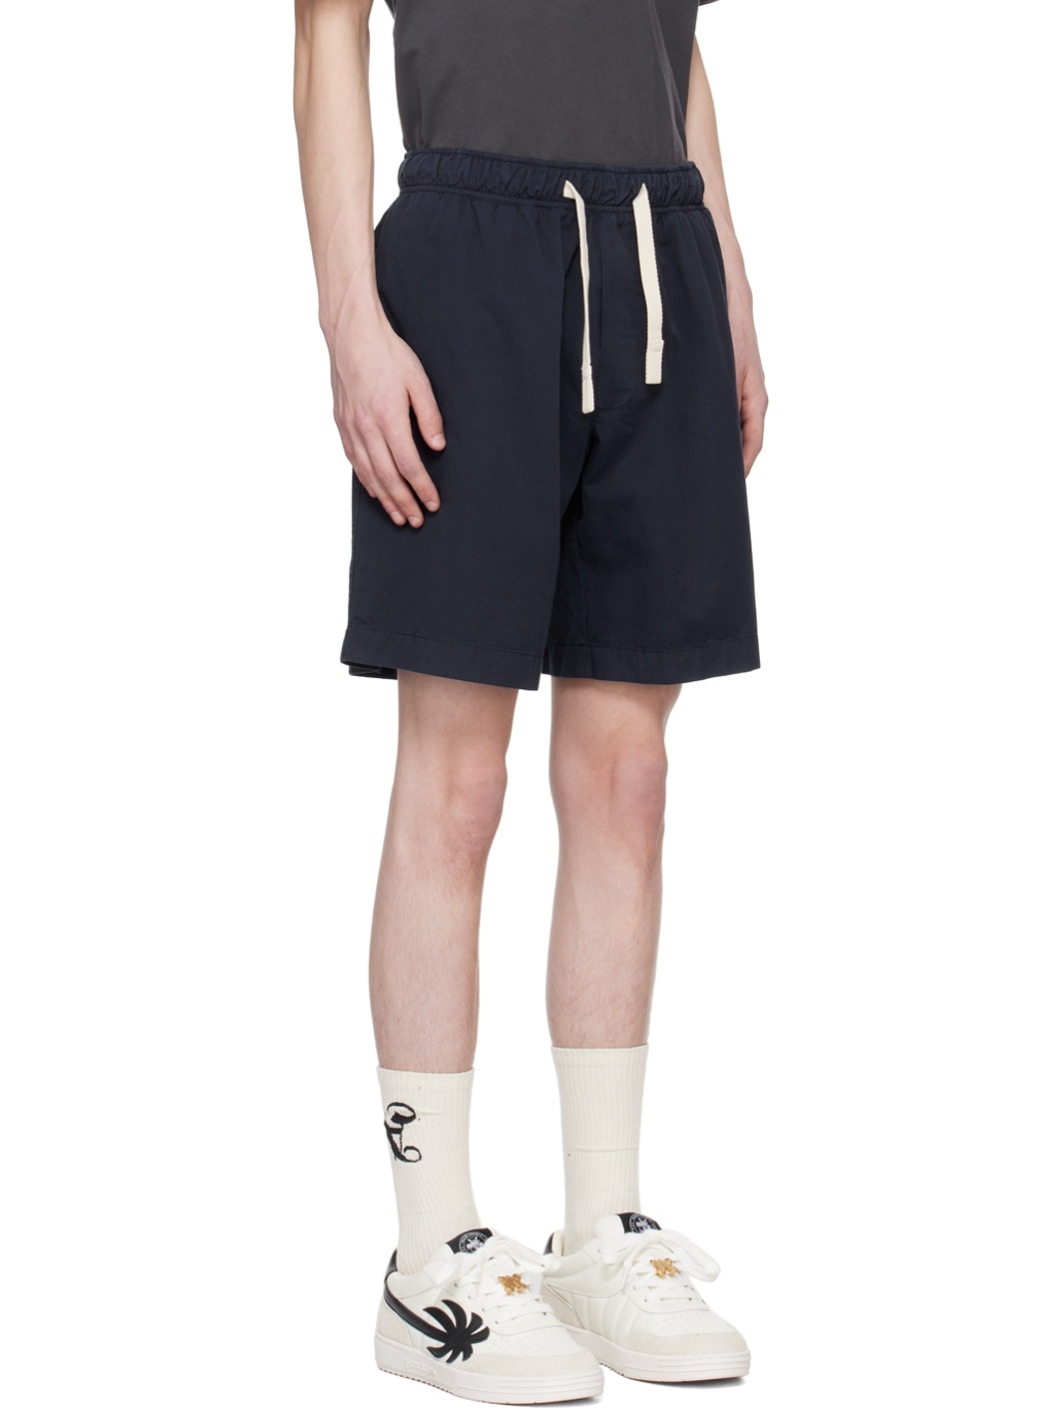 Navy Embroidered Shorts - 2